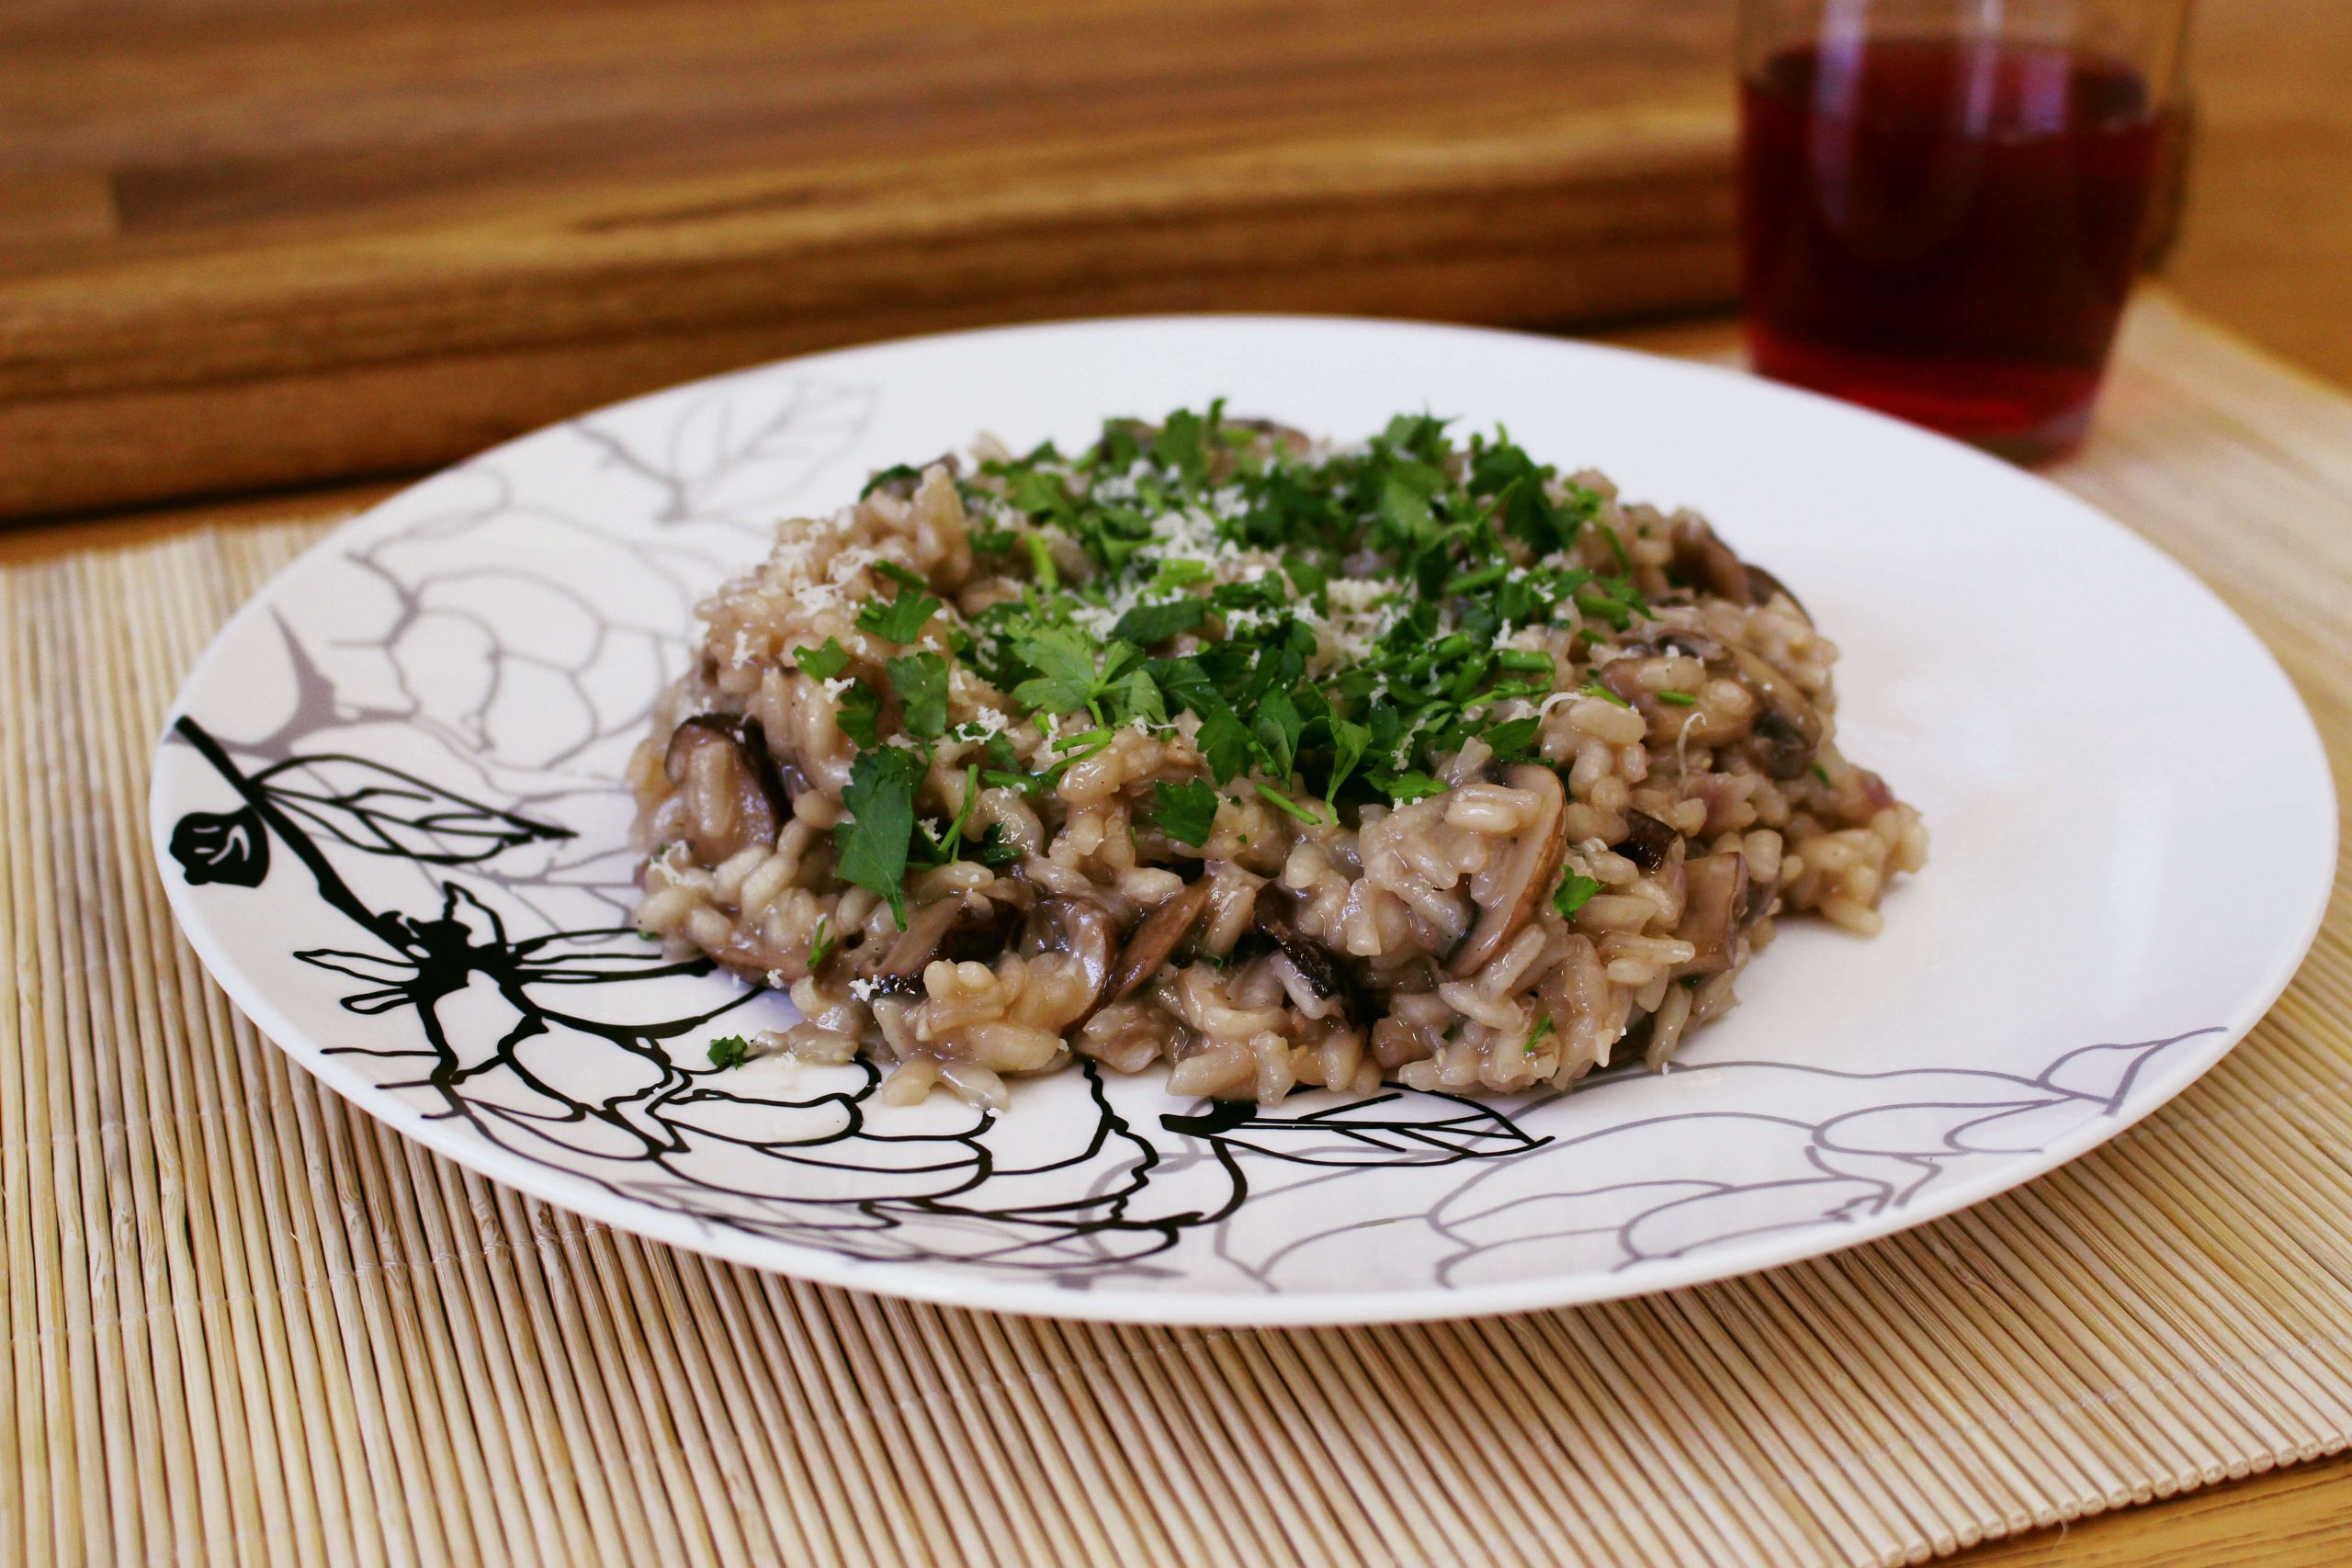 Gourmet Mushroom Risotto
 Gourmet Mushroom Risotto Very Tasty and Quick To Make